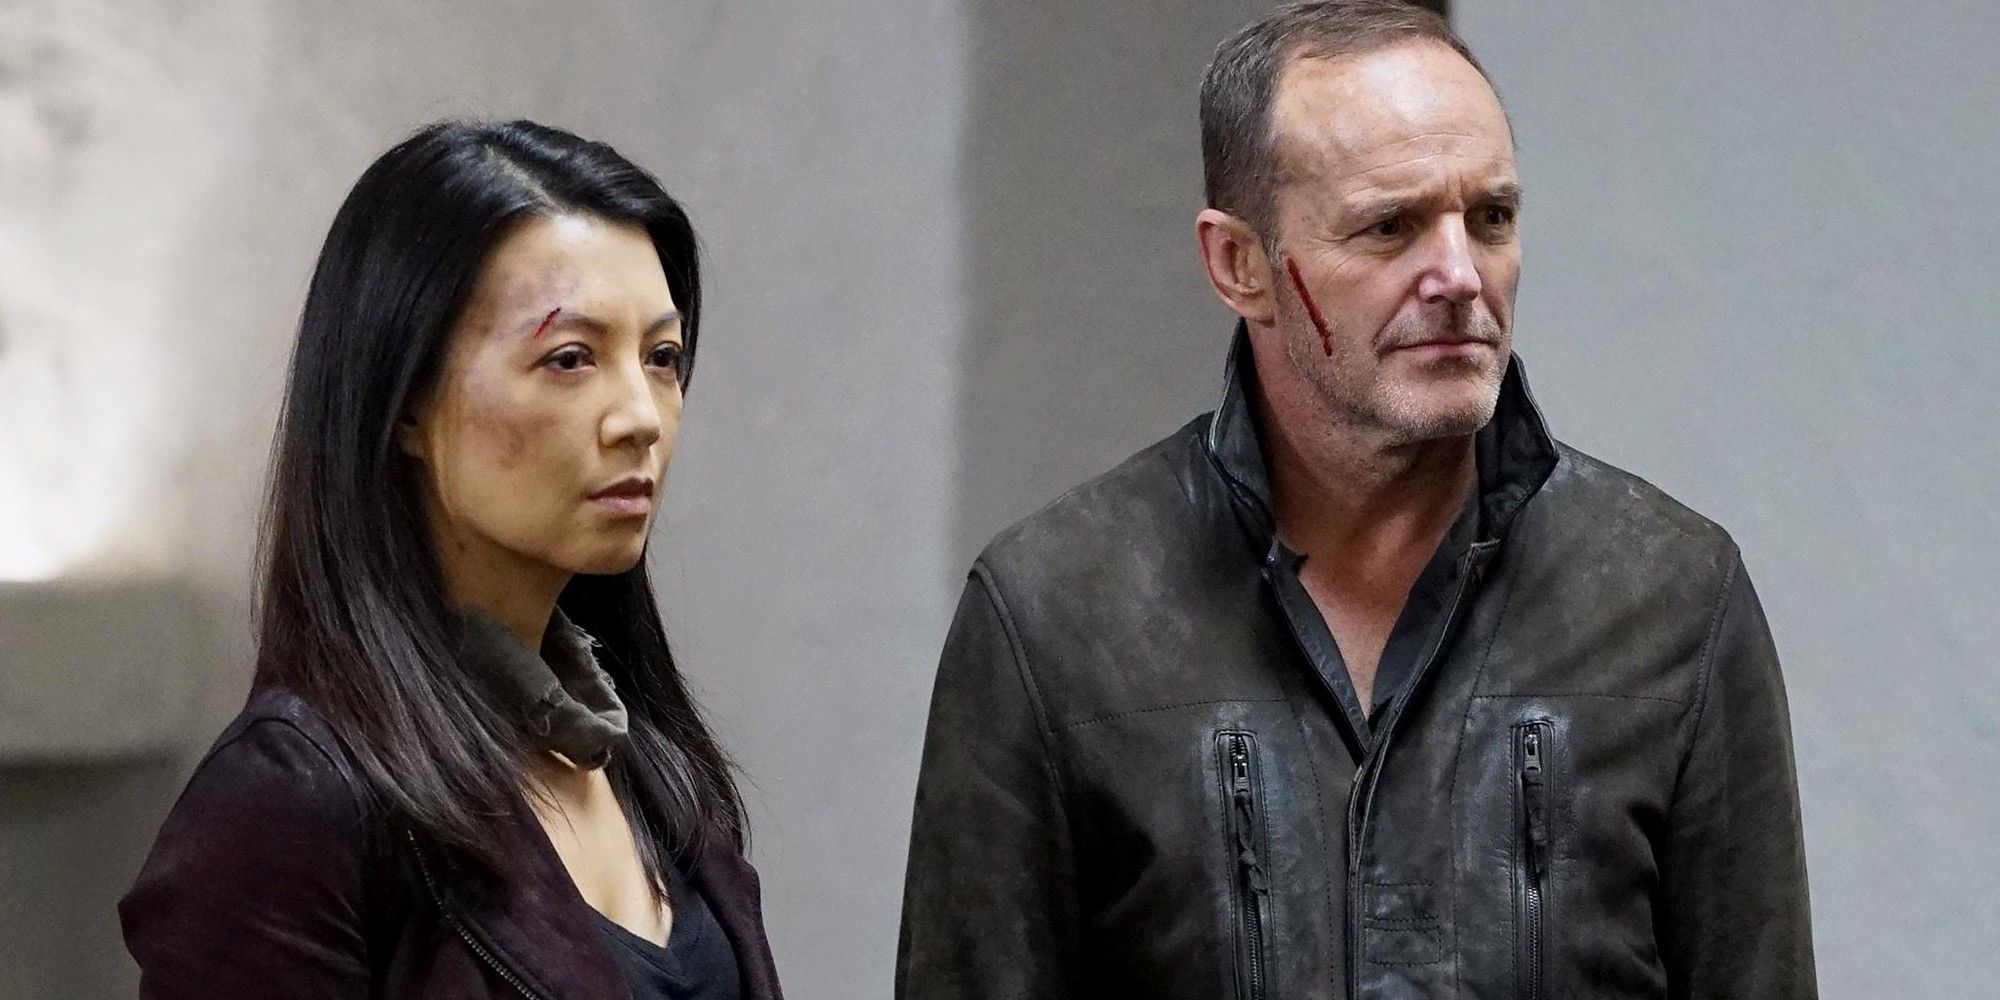 Ming Na Wen as Melinda May and Clark Gregg as Phil Coulson in Agents of Shield